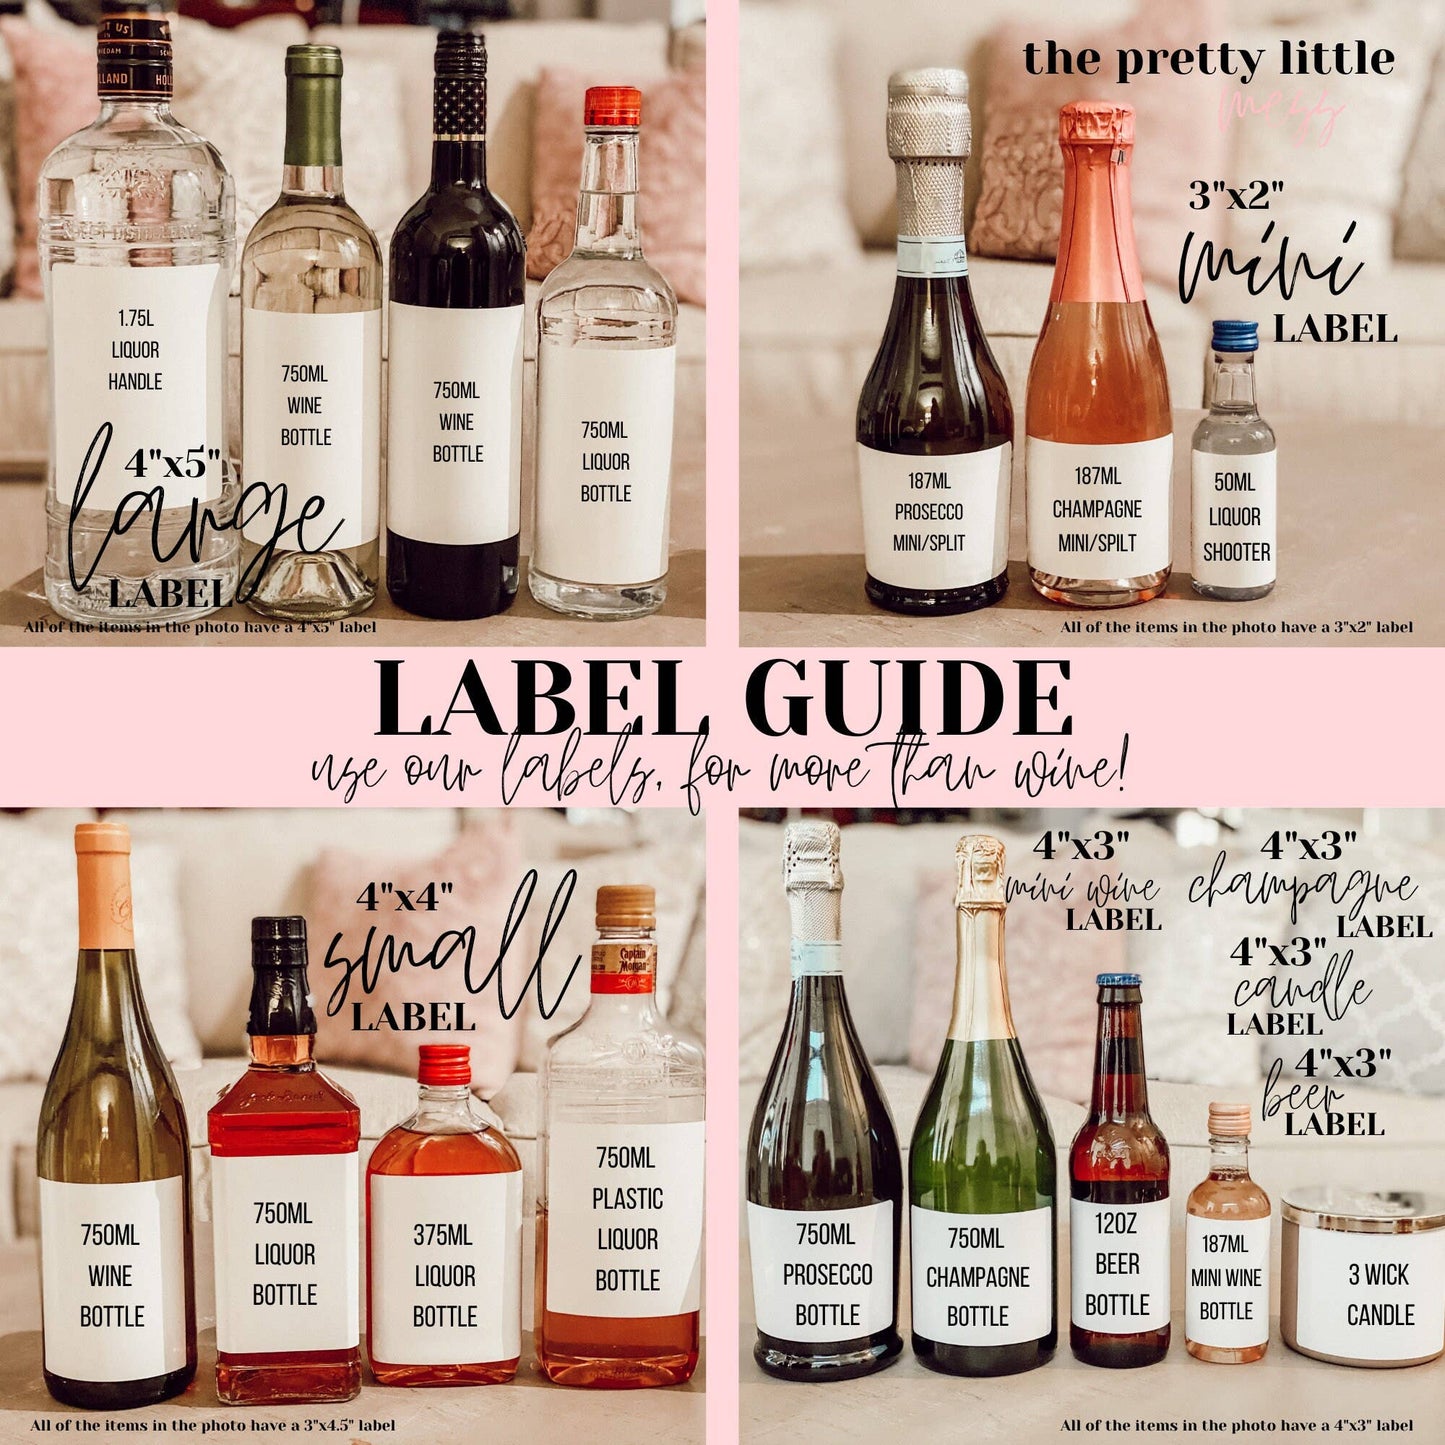 Bottle Labels: "Let's Drink Wine and Judge People" (Multiple Sizes)